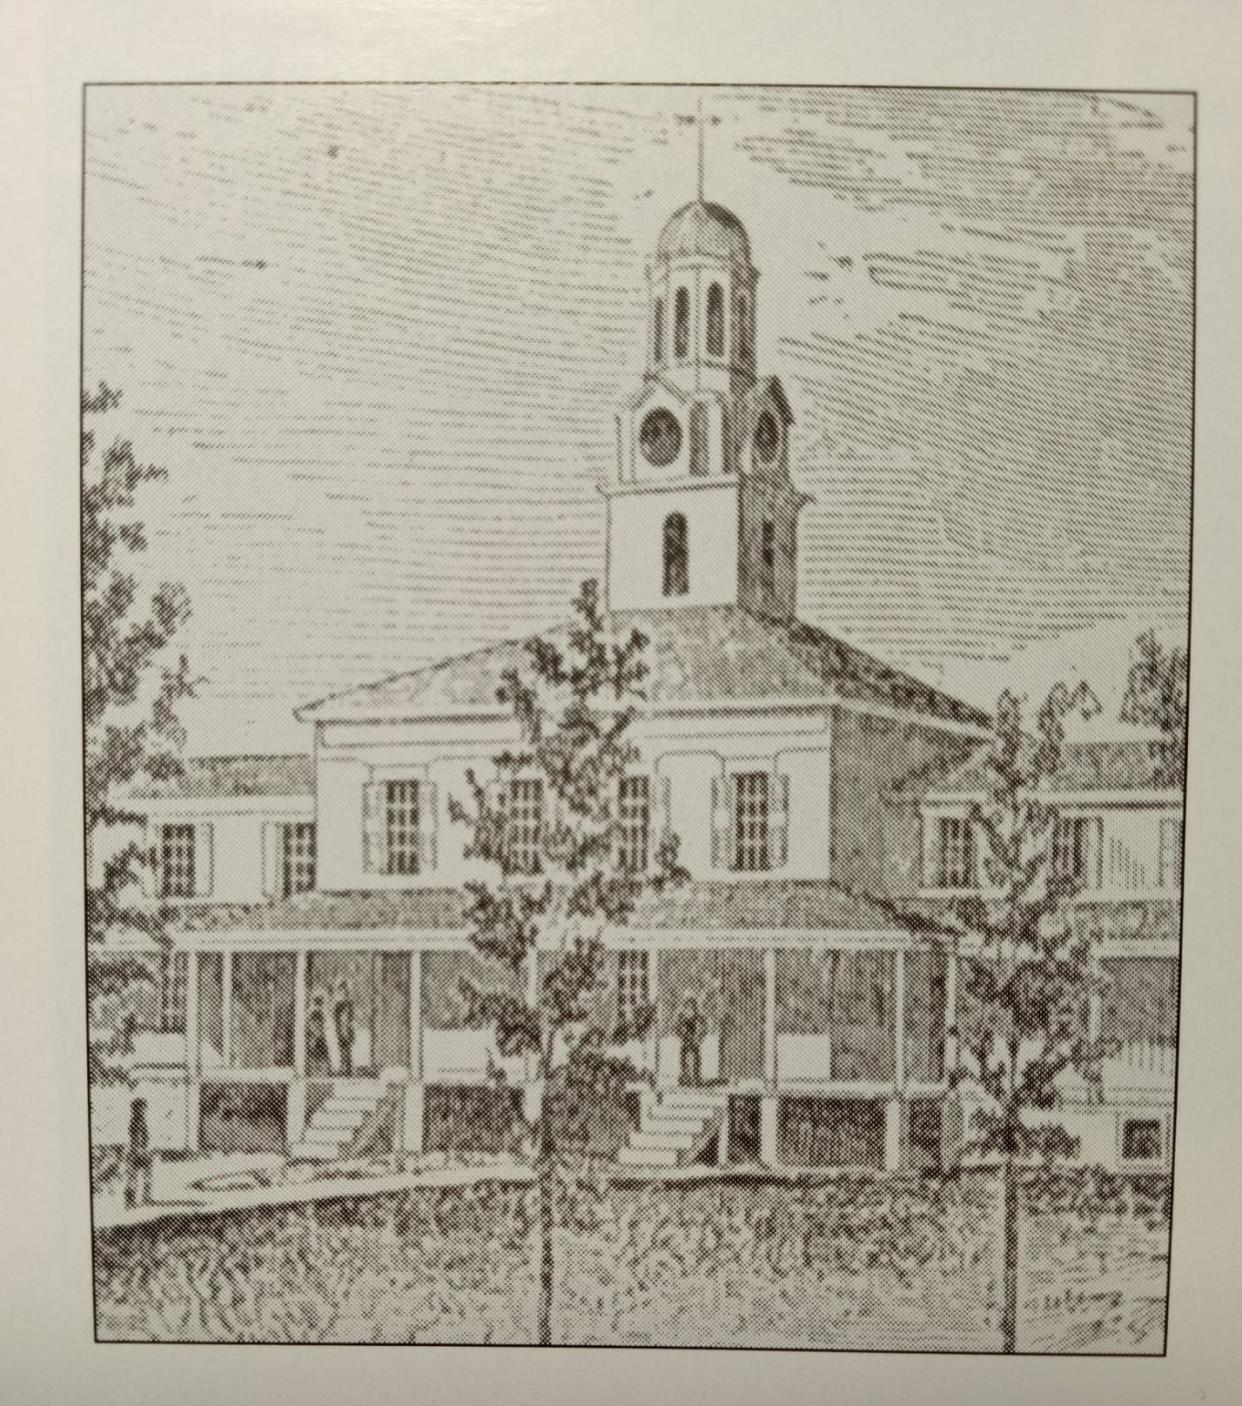 This is the courthouse building in Bethany after it became the University of Northern Pennsylvania. This was the Wayne County courthouse from 1817 until 1843 when the county seat moved to Honesdale. The landmark burned in 1857.